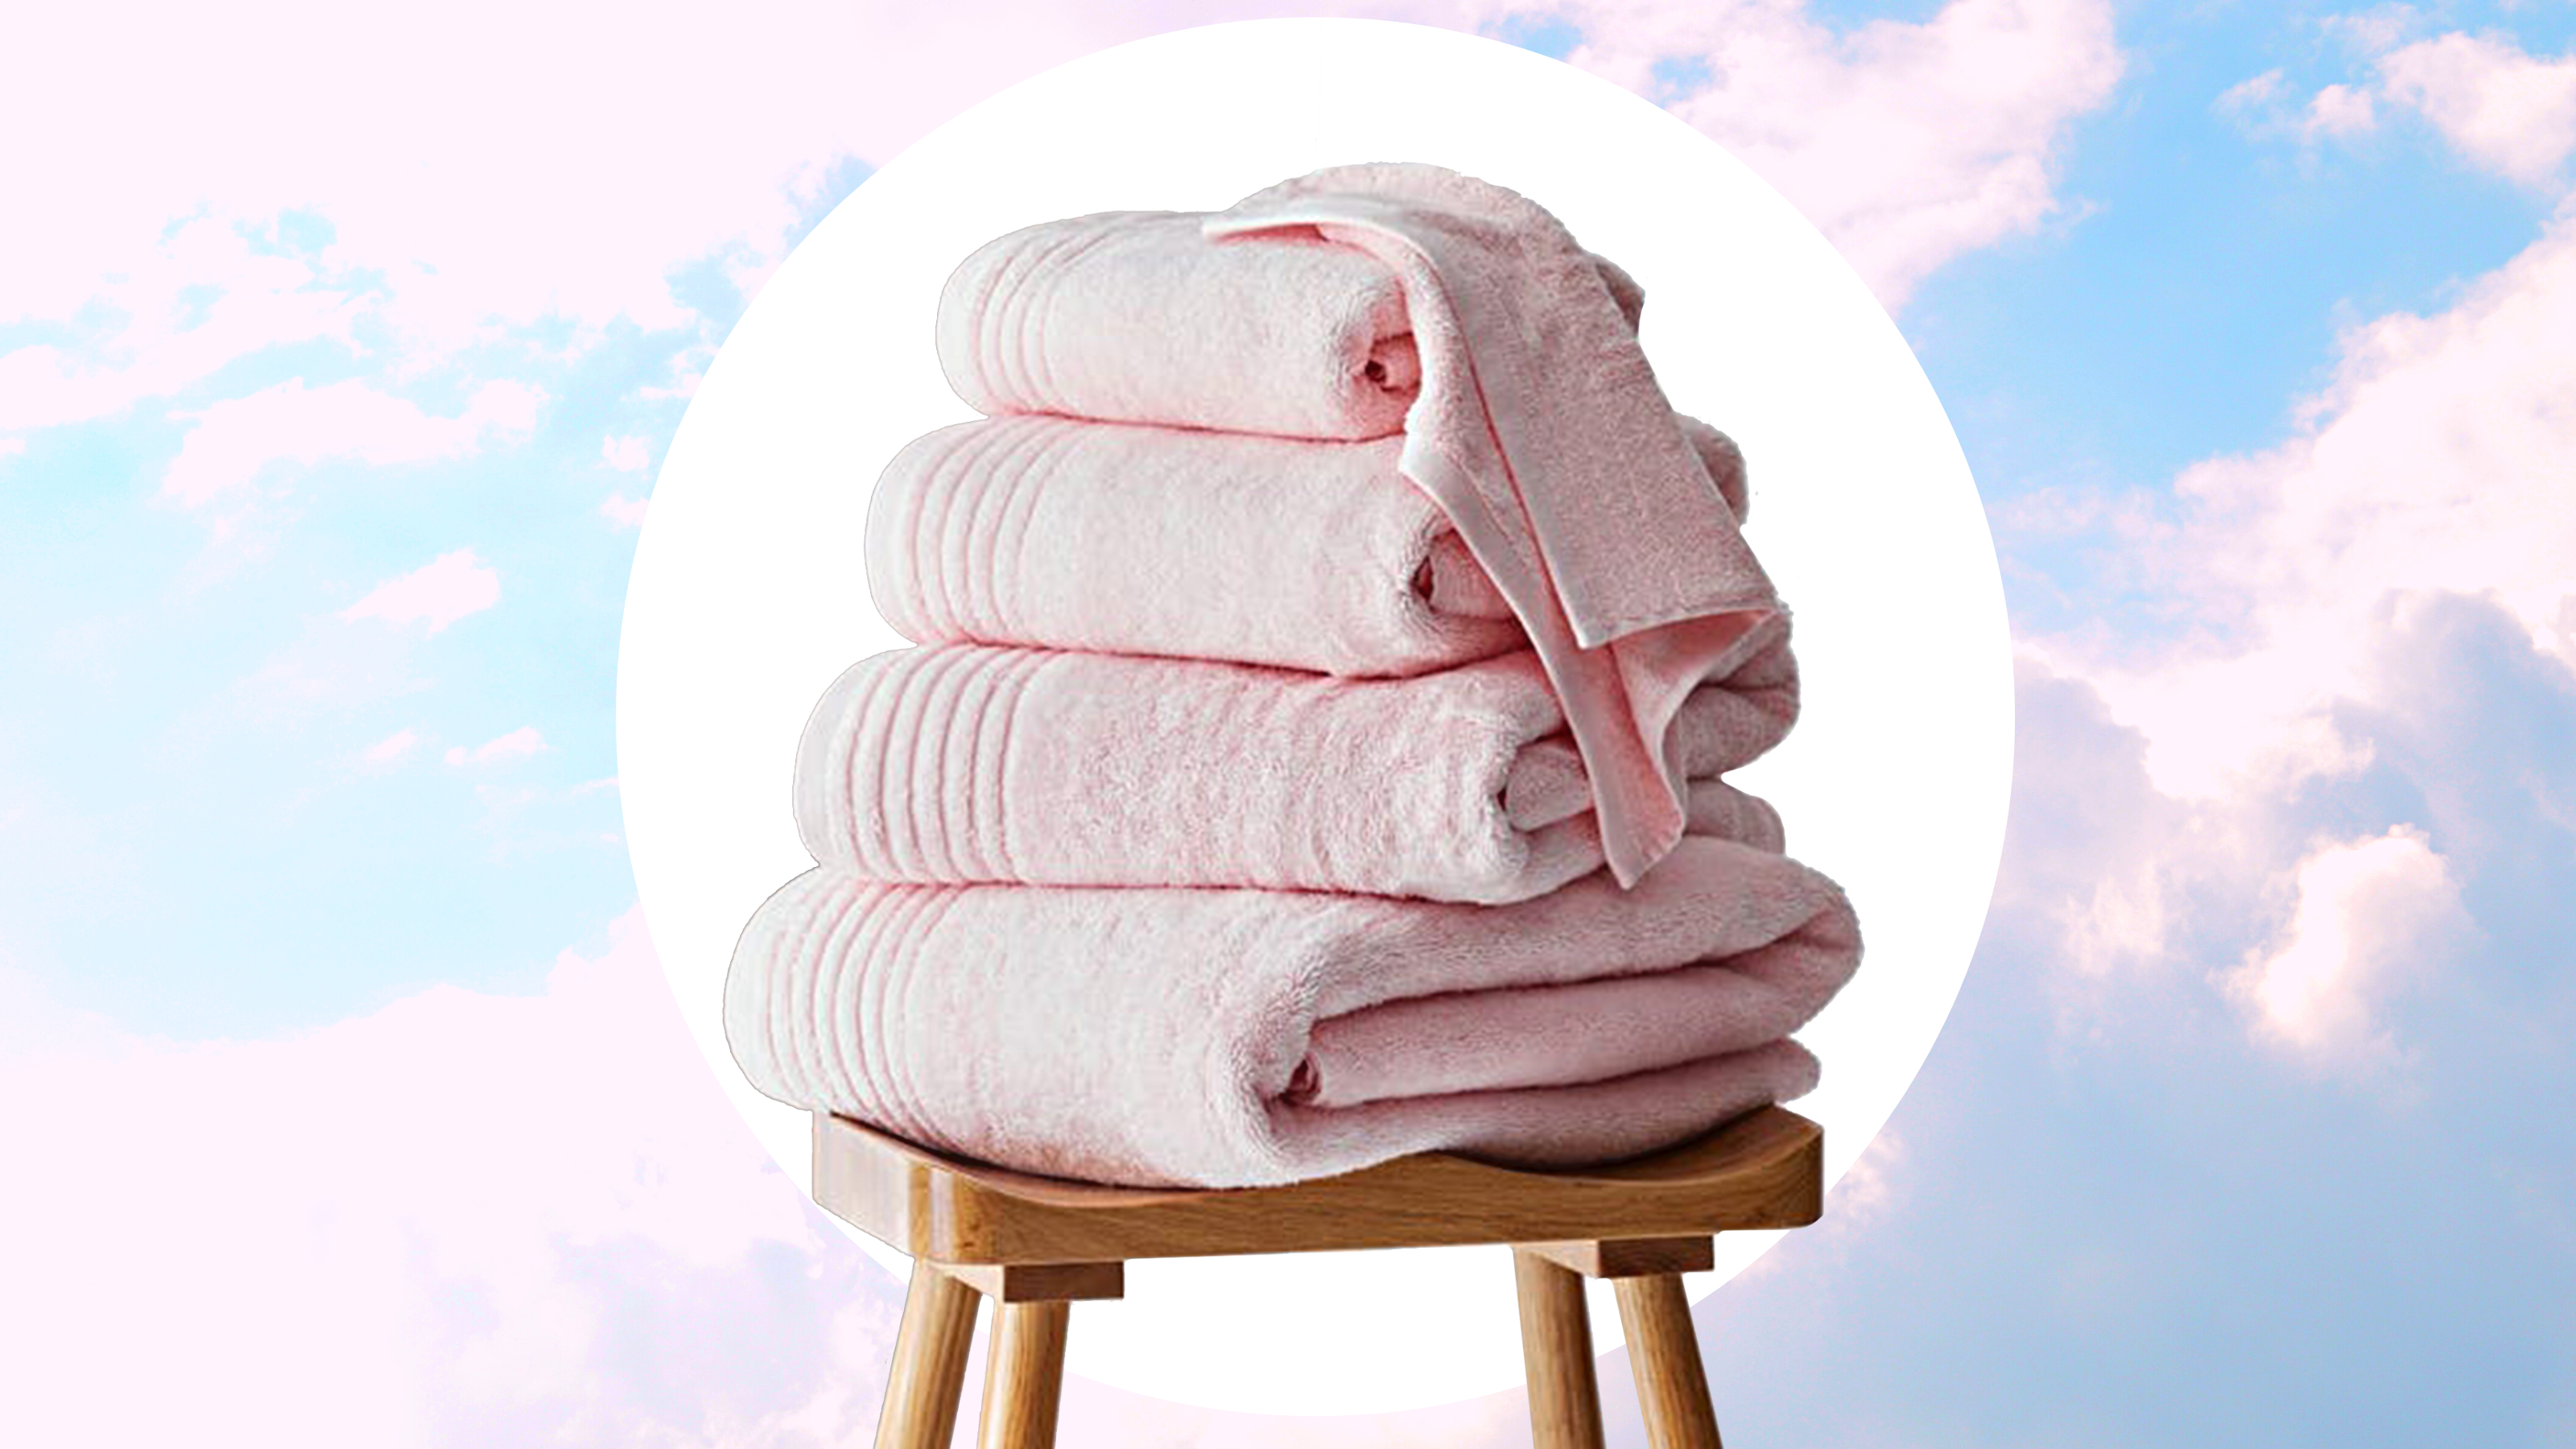 How to Soften Towels